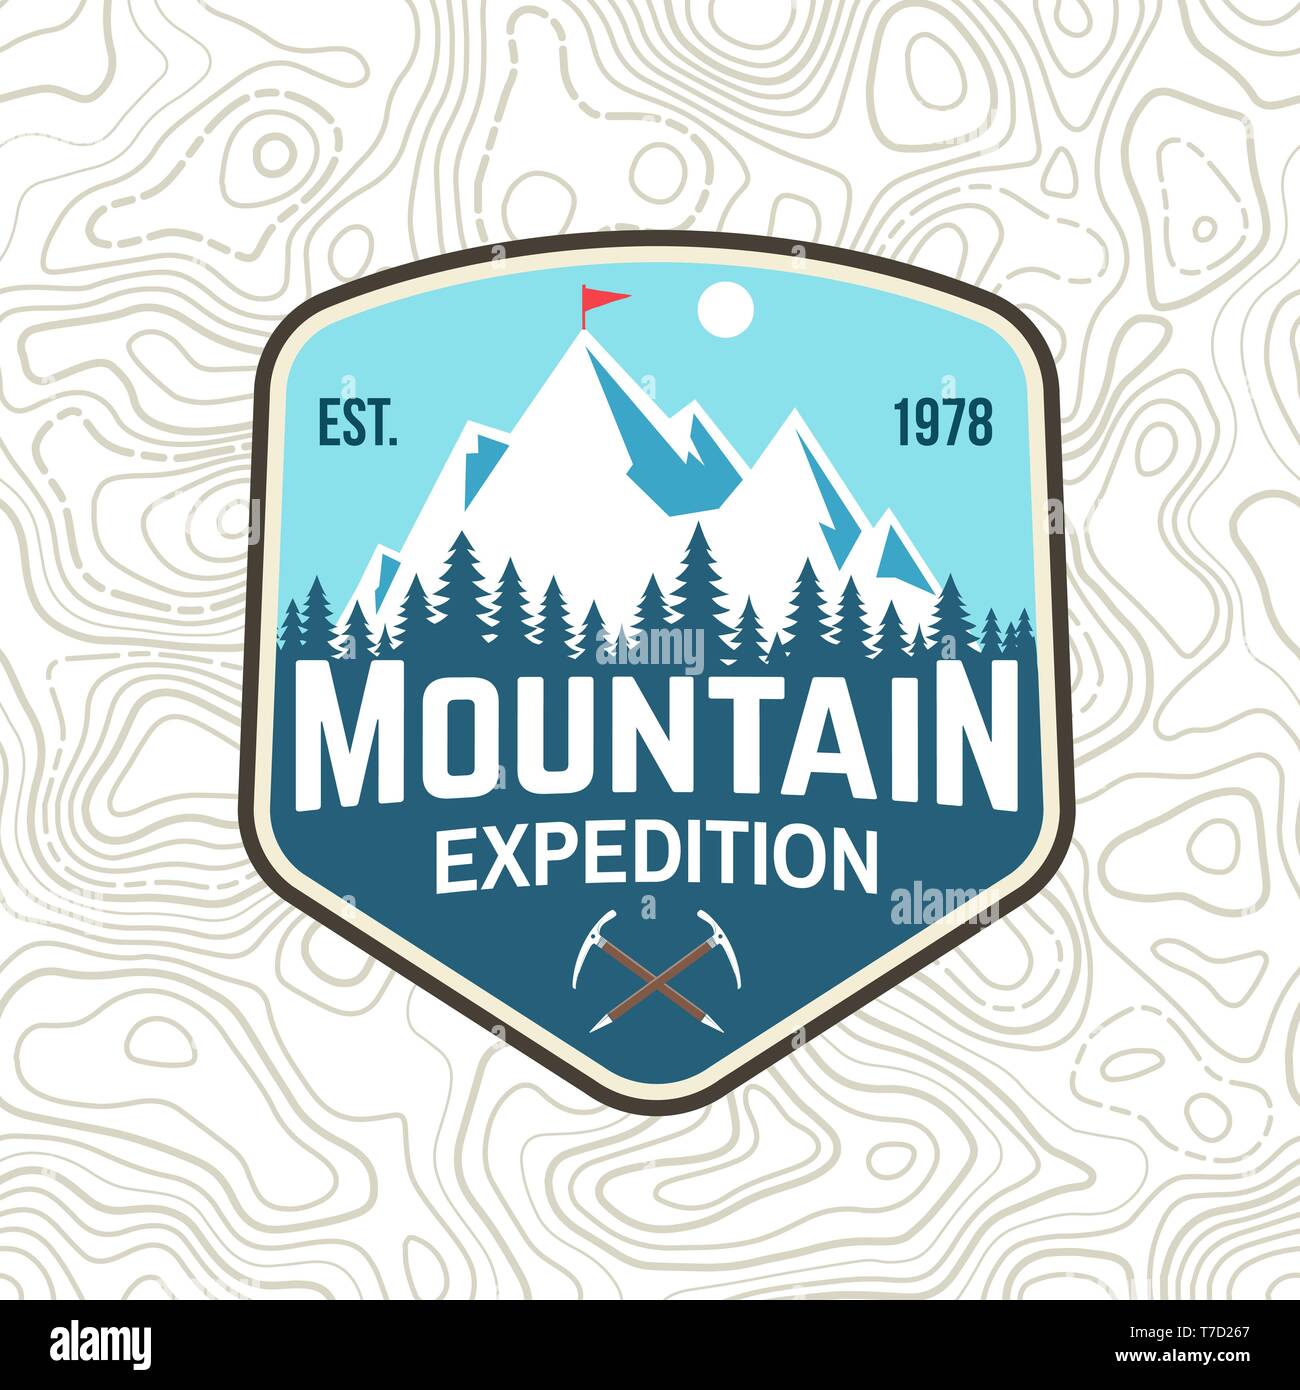 Mountain expedition patch. Vector illustration. Concept for shirt or badge, print, stamp or tee. Vintage typography design with ice axe and mountain silhouette. Outdoors adventure emblems. Stock Vector